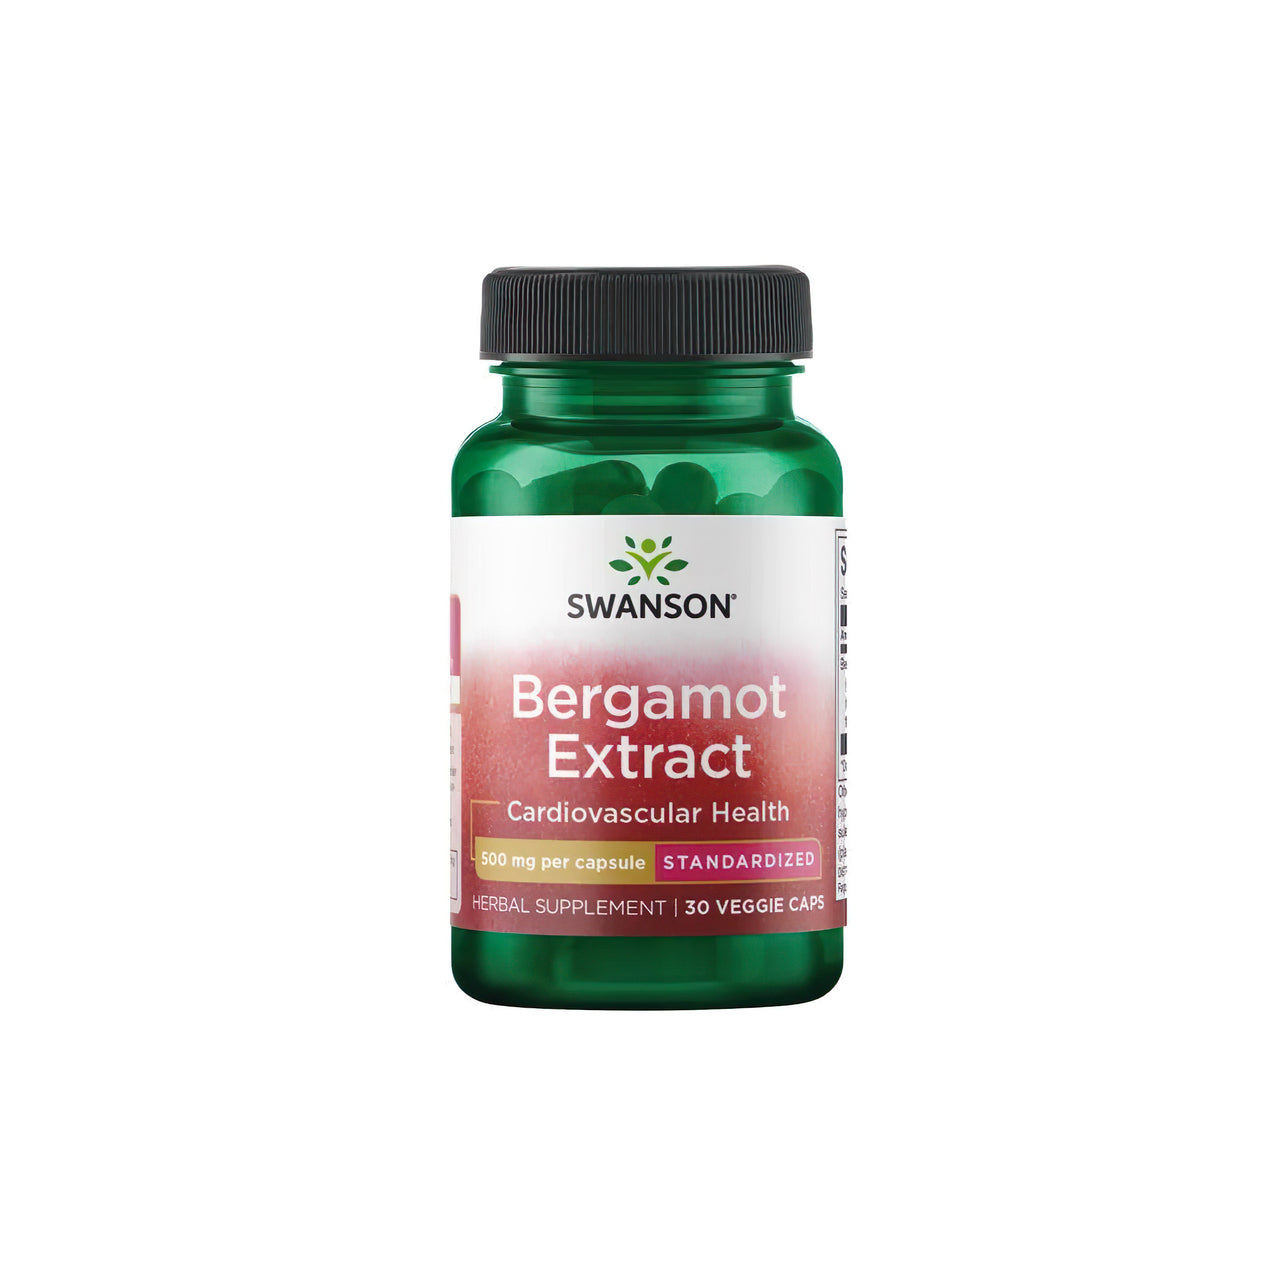 A dietary supplement bottle of Swanson Bergamot Extract 500 mg 30 vcaps.